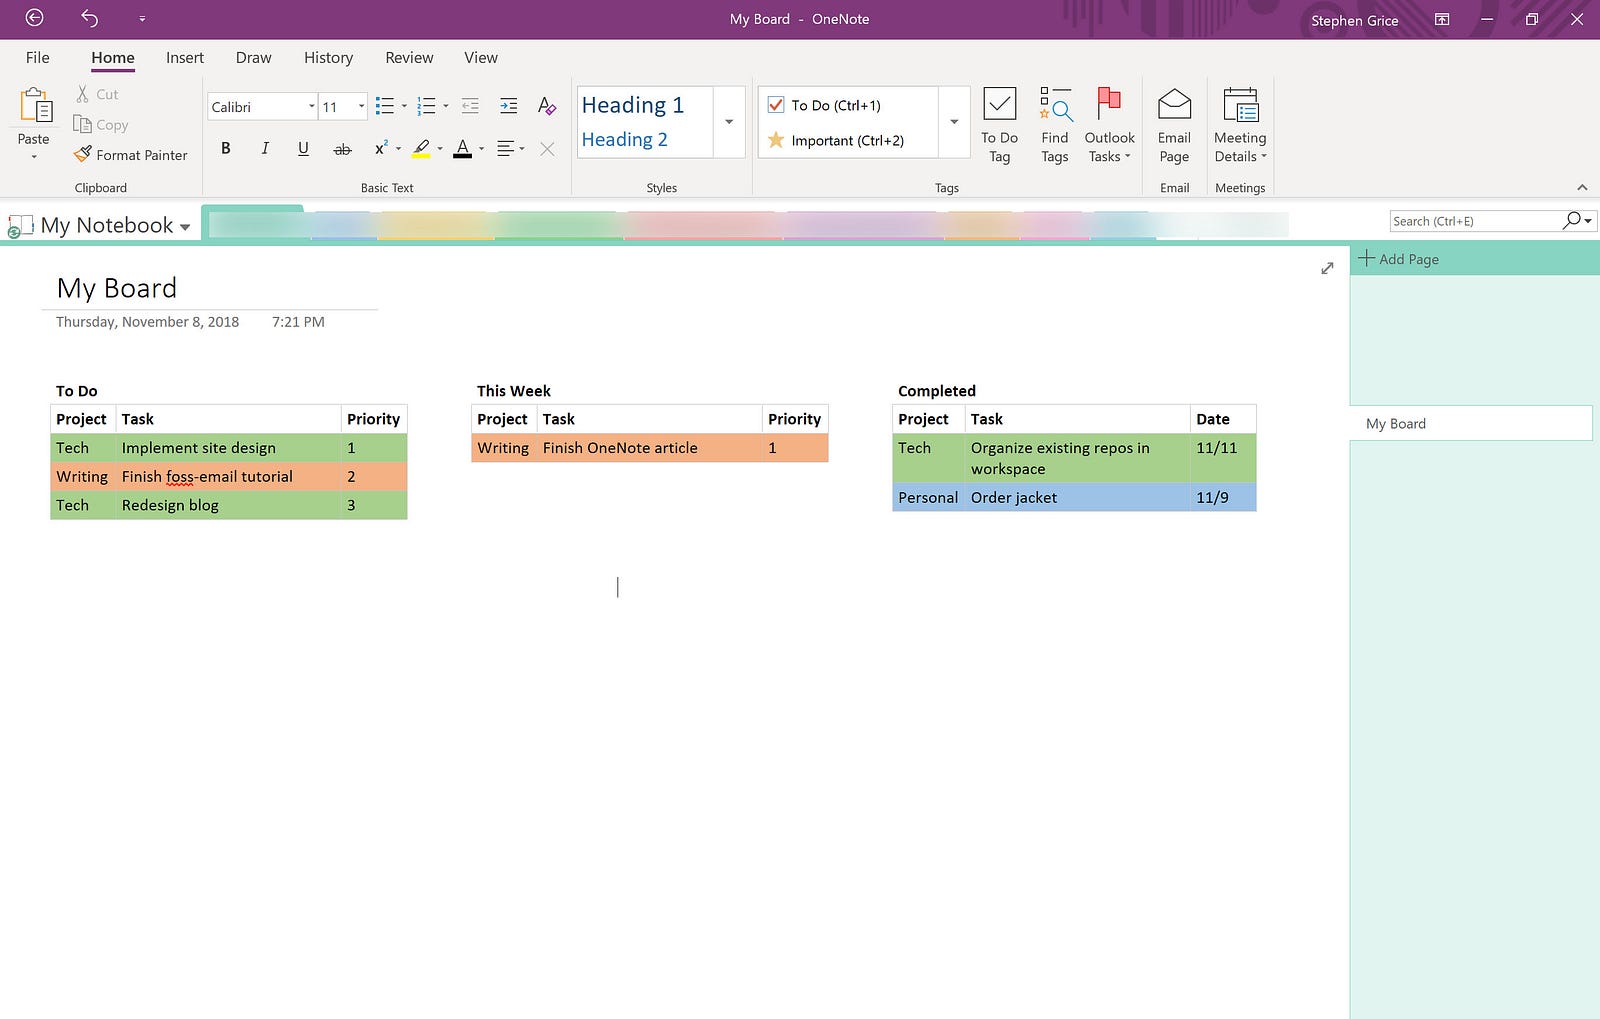 How to Create a Kanban Board in OneNote Steve Grice Medium